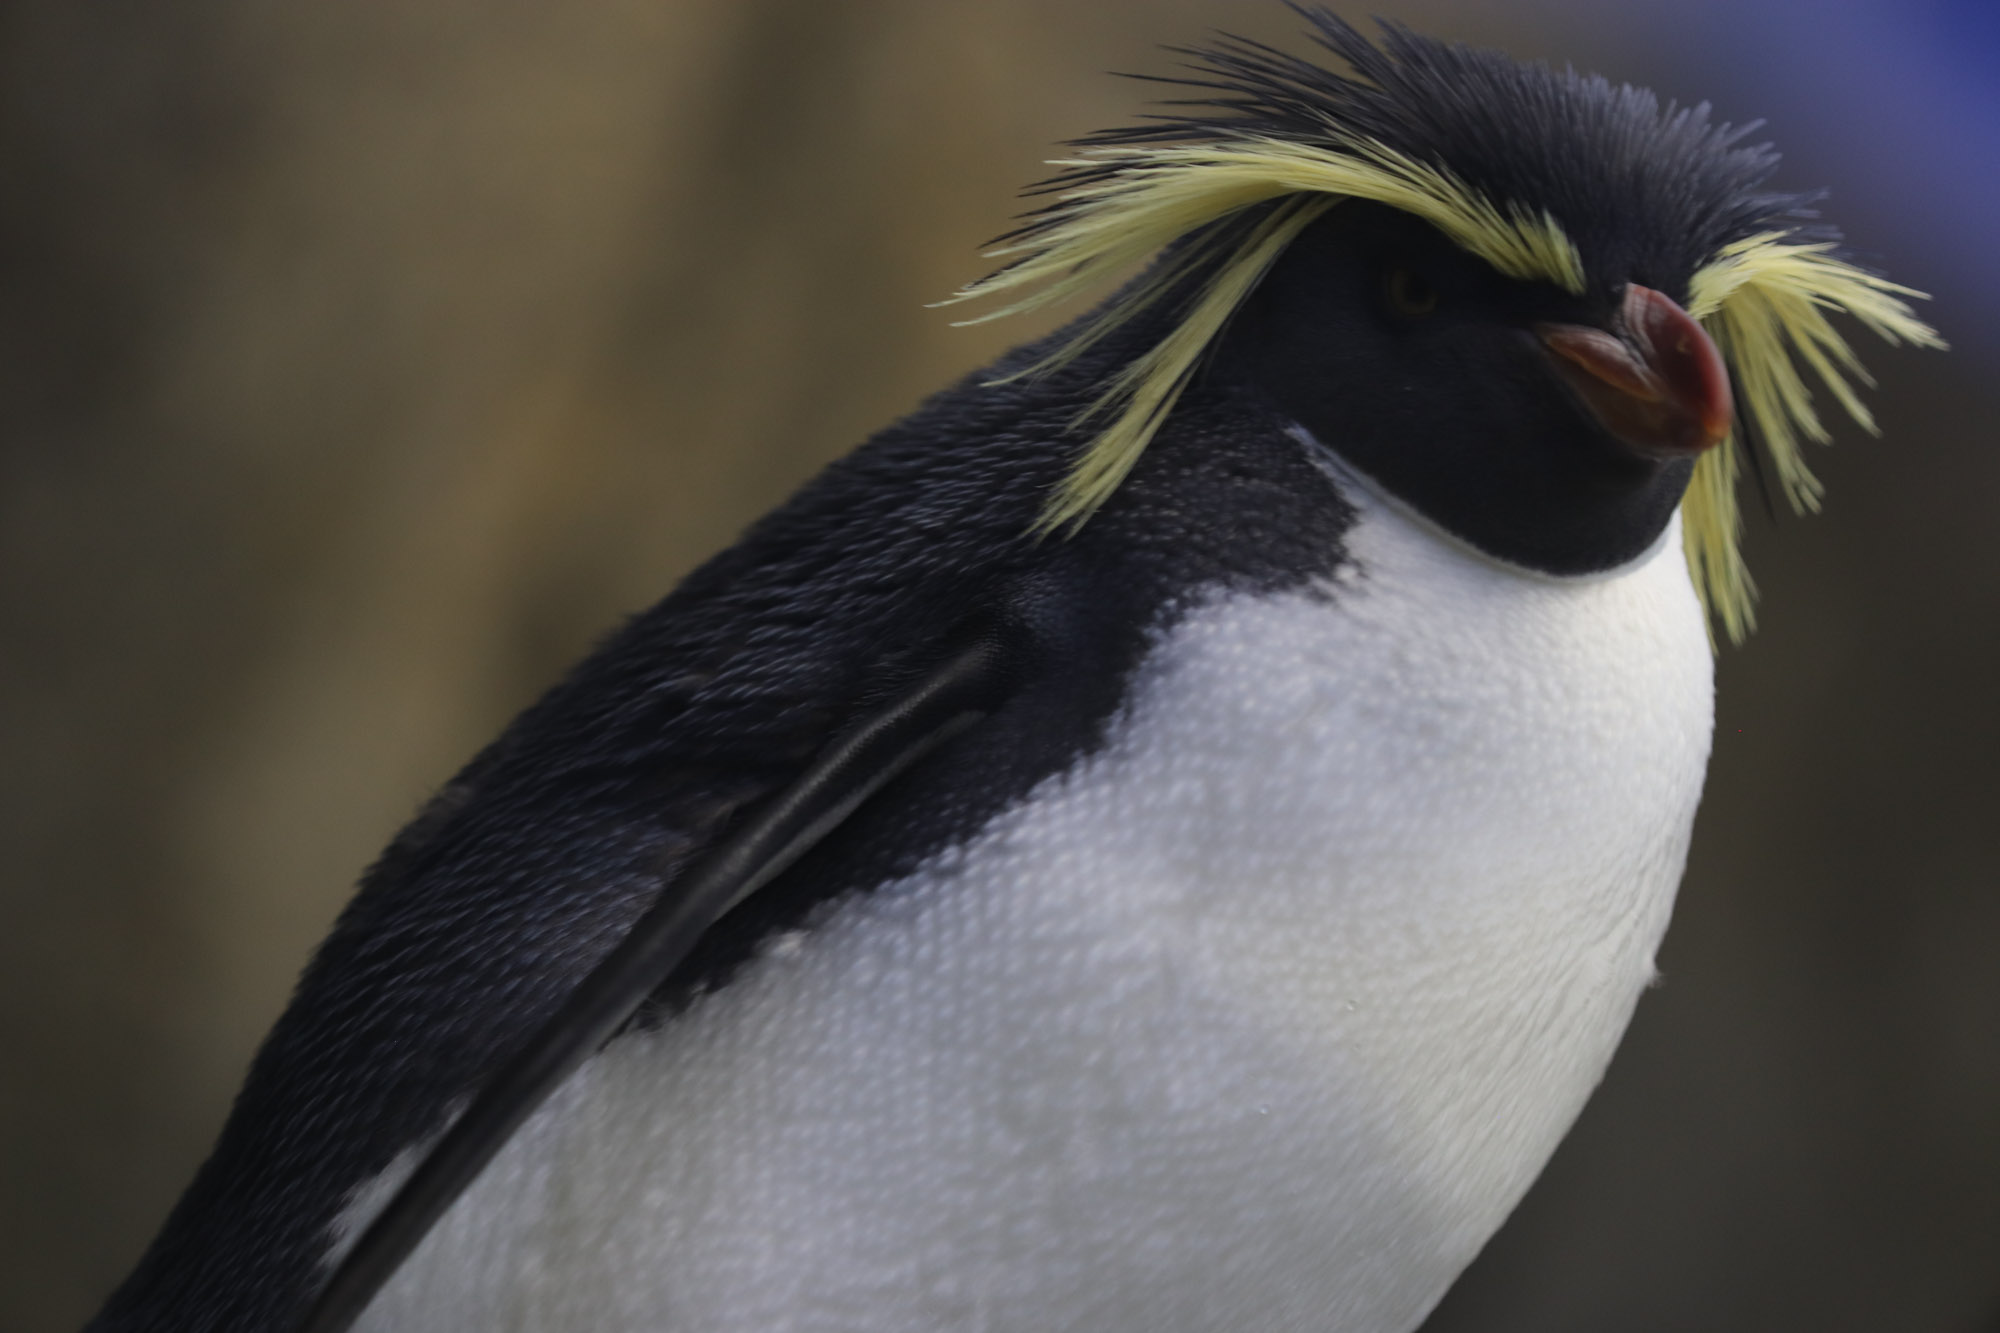 A Rockhopper penguin displays a vibrance and energy, even standing still. Though it has identical coloring, the smooth lines of the King are very different from the suggestion of movement radiating out with the feather display on the head of the Rockhopper.